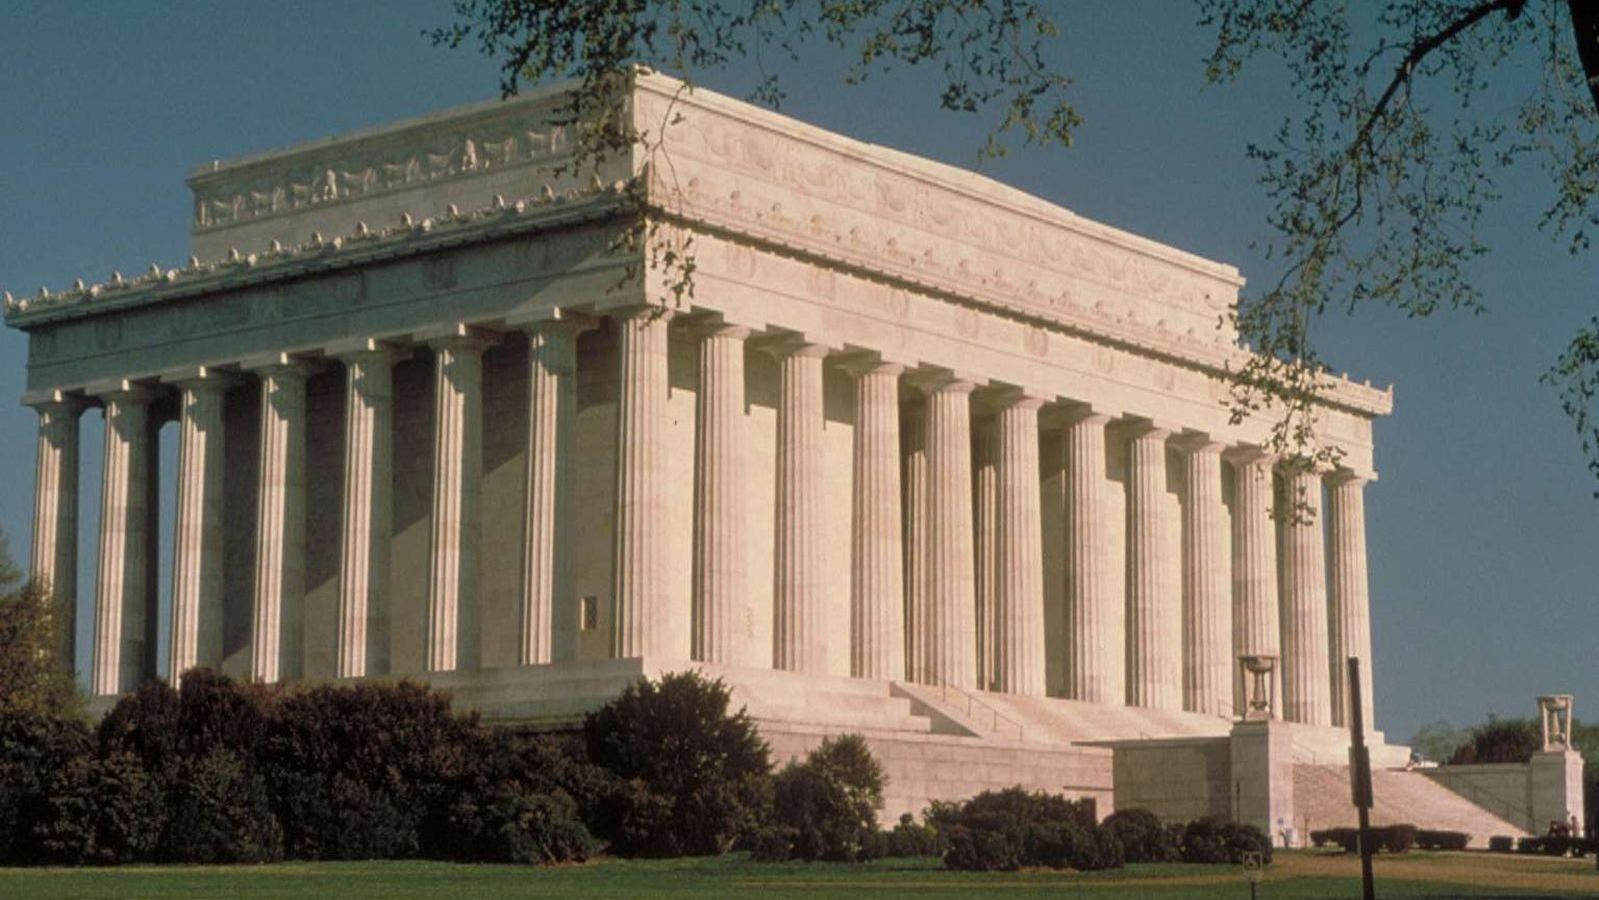 A large, rectangular monument surrounded by white columns.